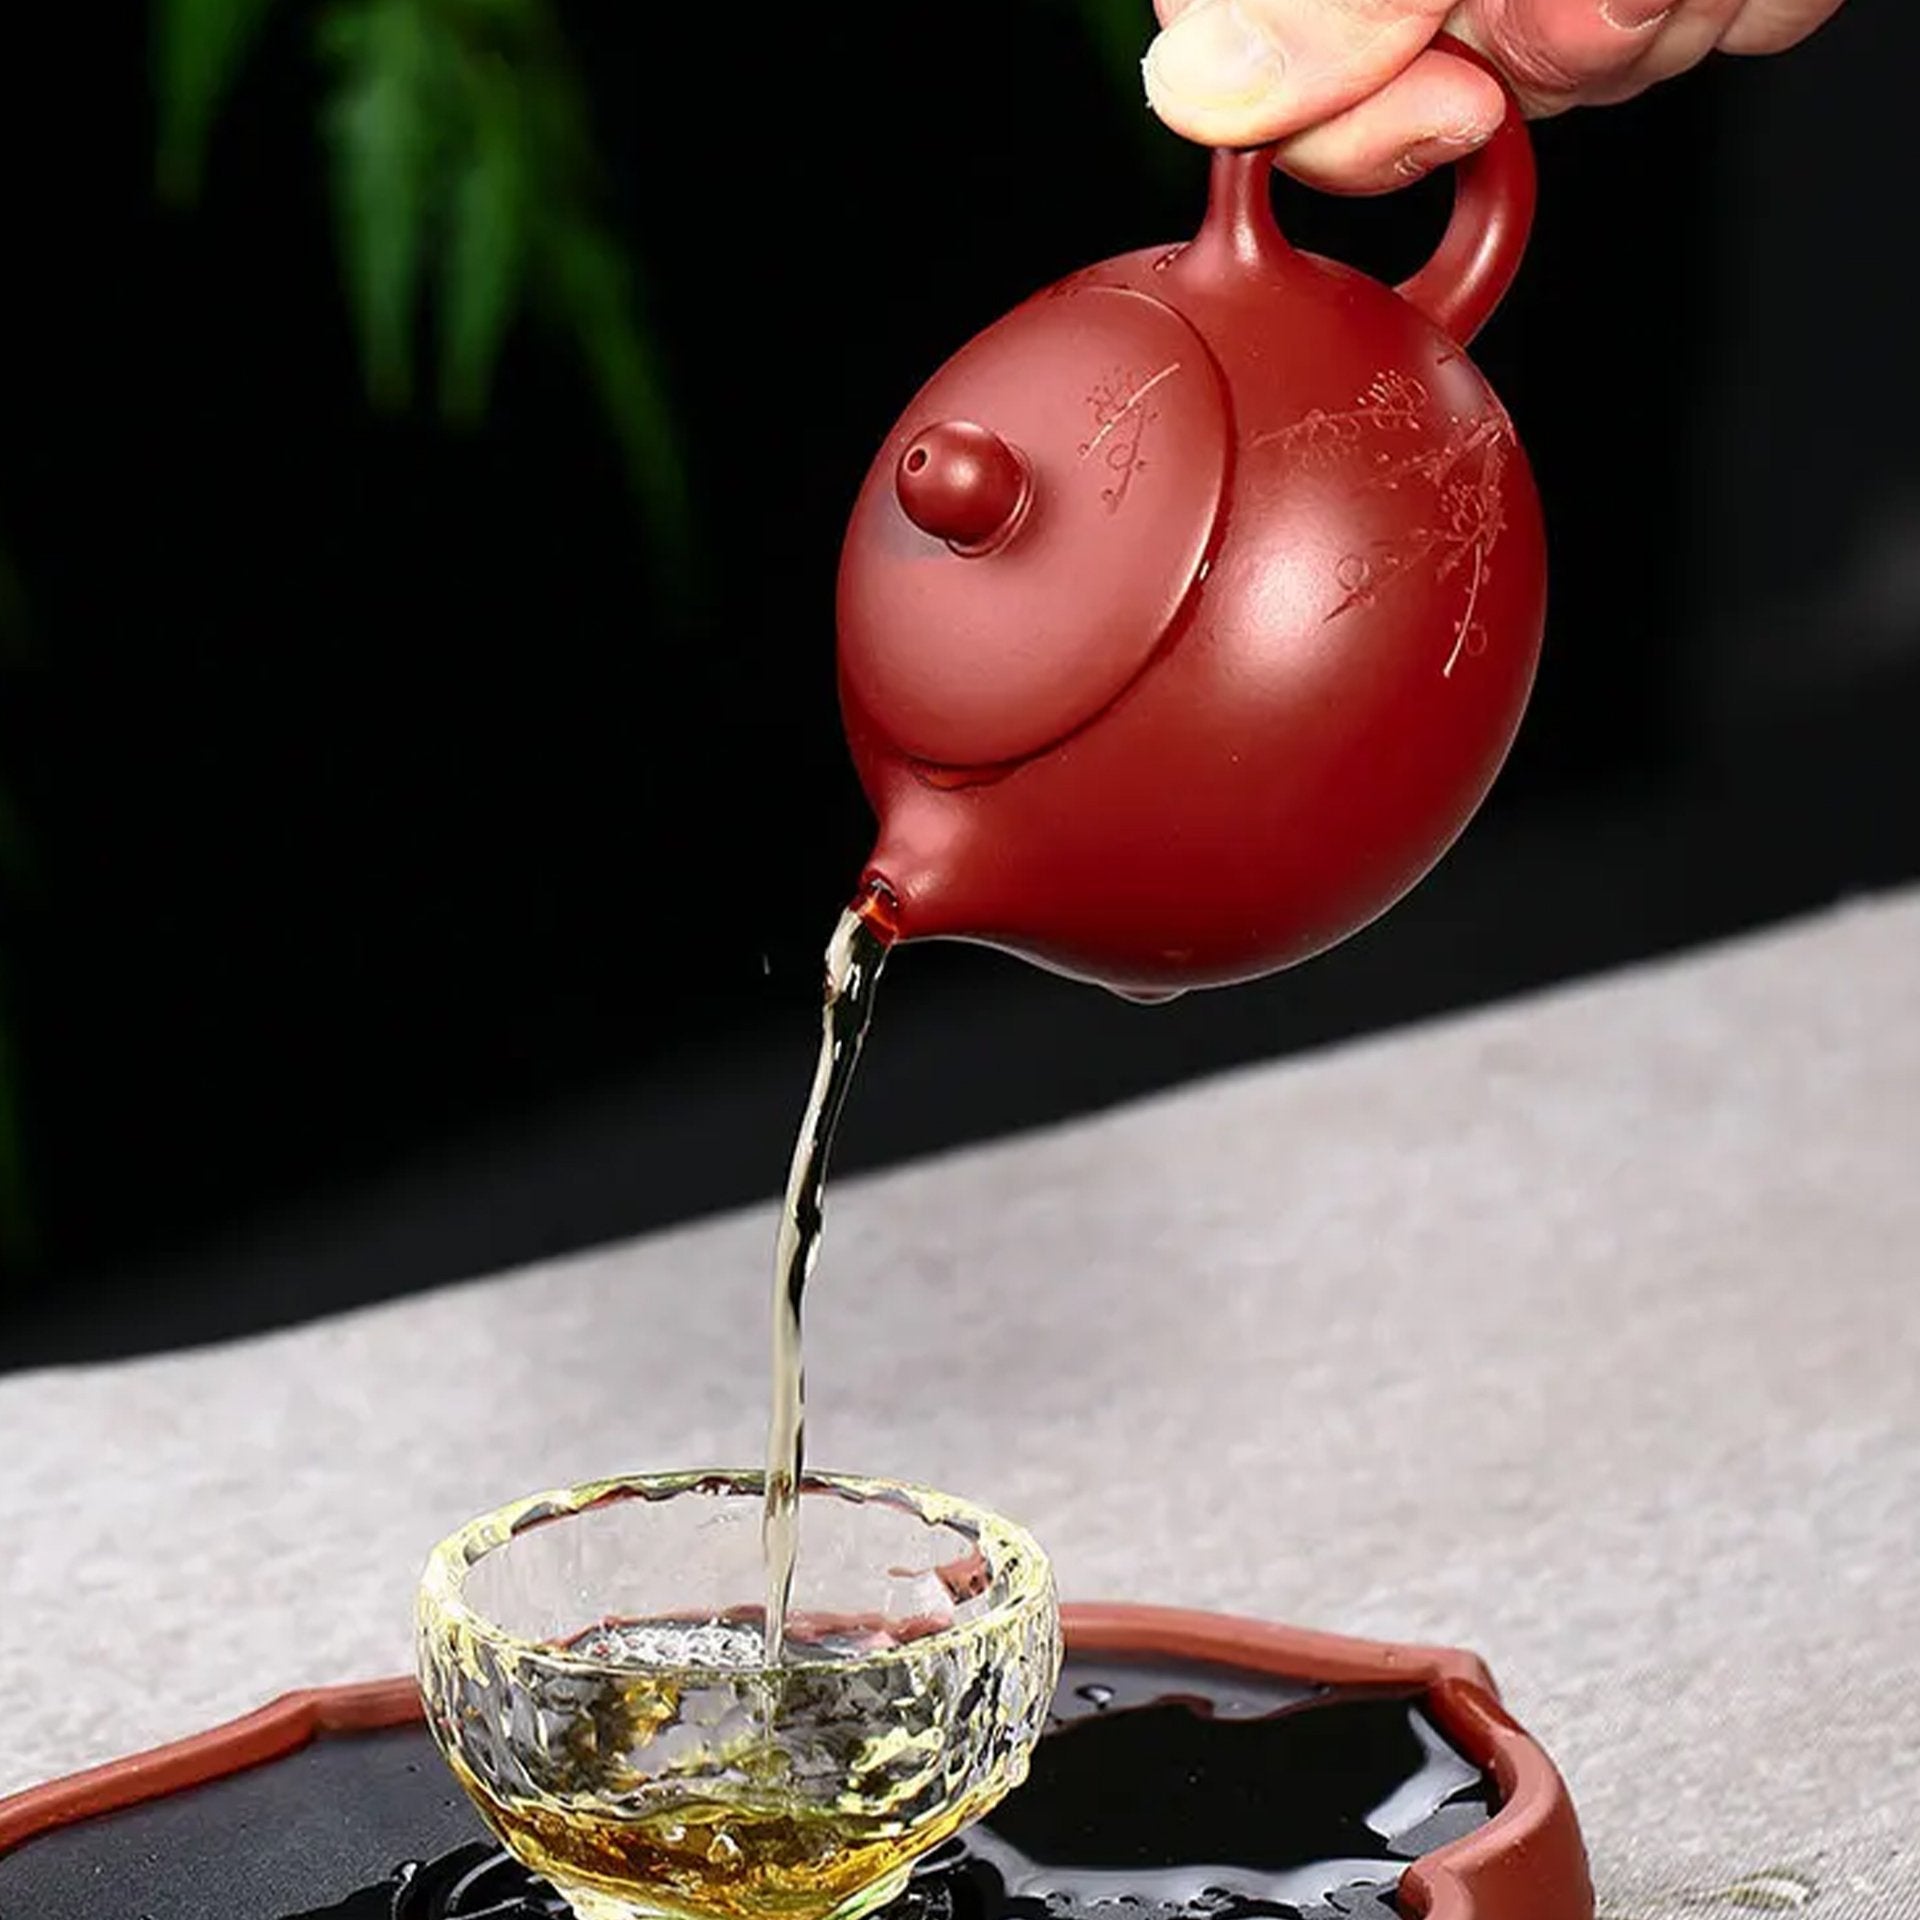 Red teapot pouring tea into a glass cup, demonstrating elegant flow and precision.